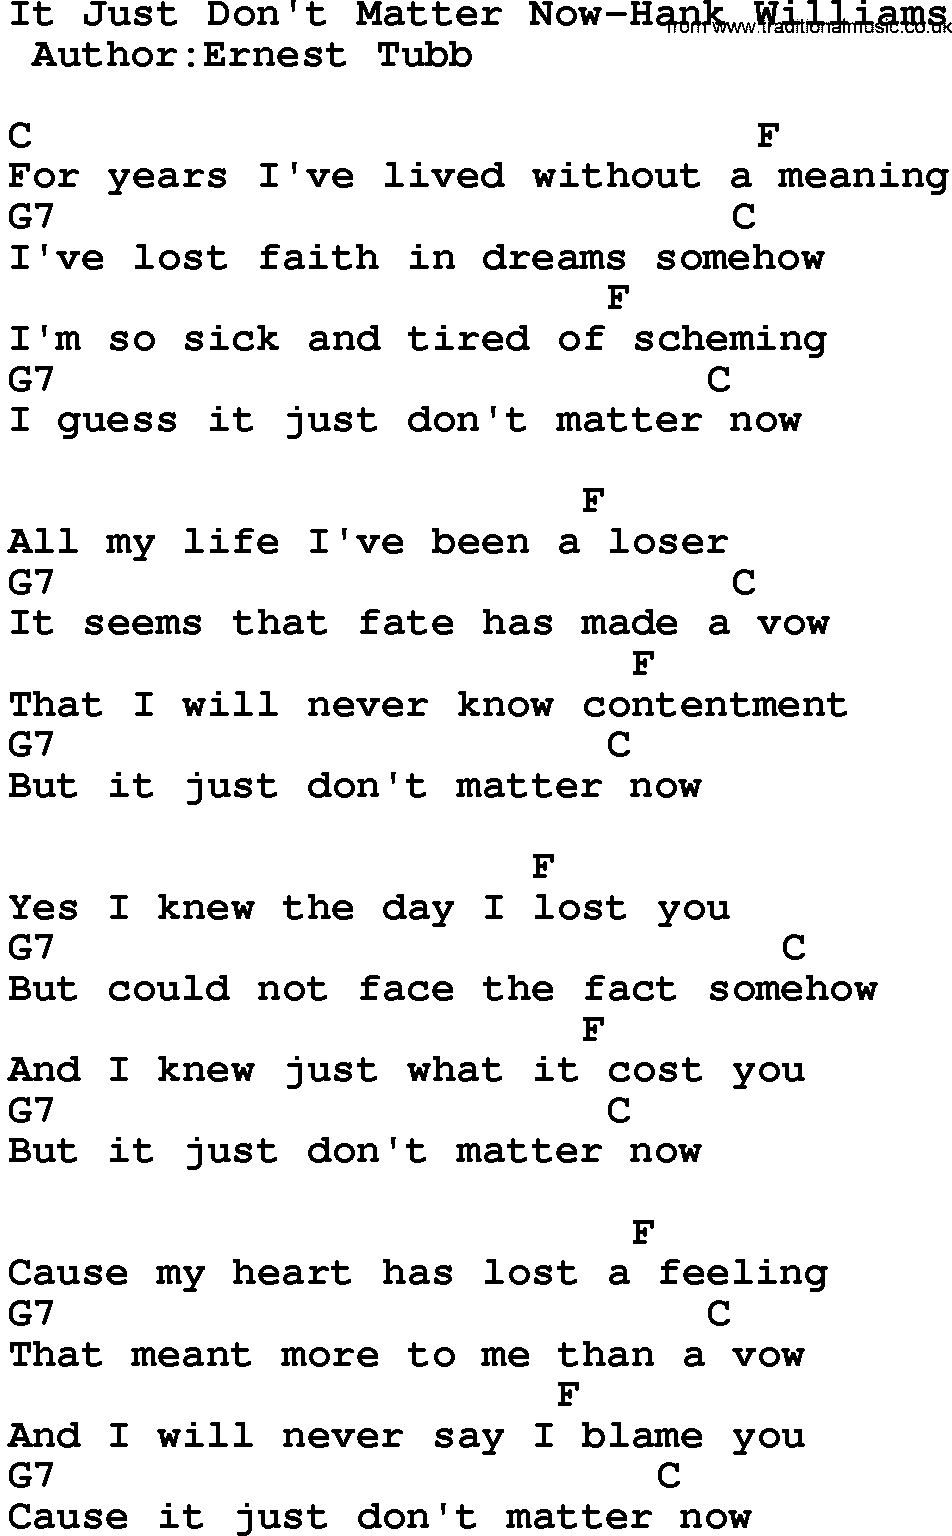 Country music song: It Just Don't Matter Now-Hank Williams lyrics and chords